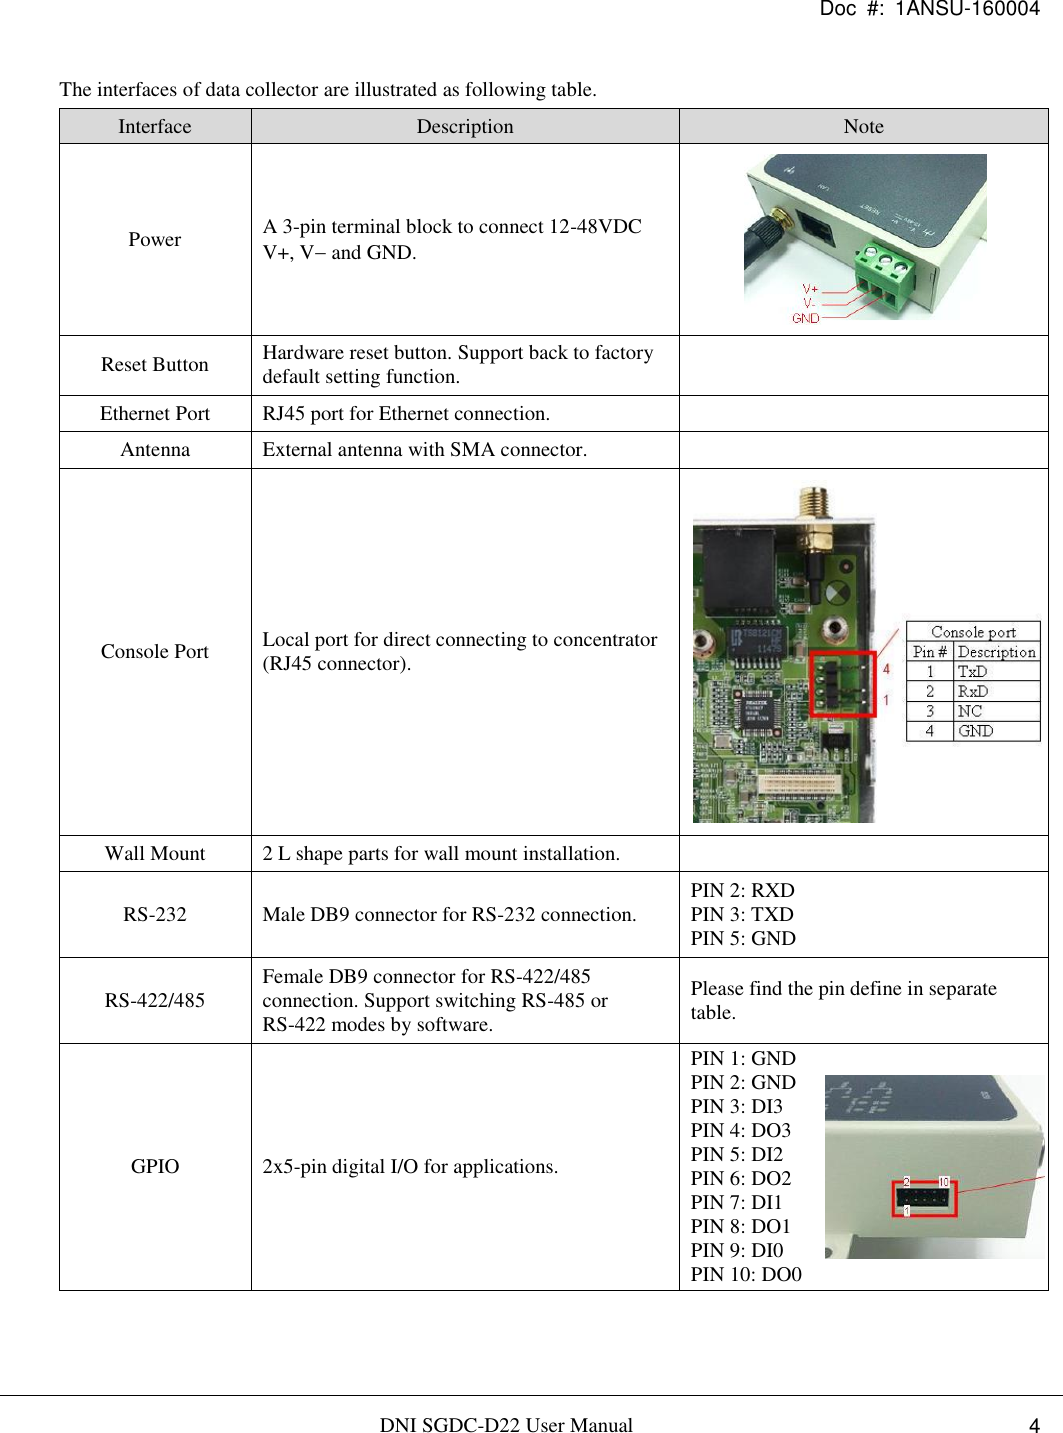 Doc  #:  1ANSU-160004   DNI SGDC-D22 User Manual i.  4 The interfaces of data collector are illustrated as following table. Interface Description Note Power A 3-pin terminal block to connect 12-48VDC V+, V and GND.  Reset Button Hardware reset button. Support back to factory default setting function.  Ethernet Port RJ45 port for Ethernet connection.  Antenna External antenna with SMA connector.  Console Port Local port for direct connecting to concentrator (RJ45 connector).  Wall Mount 2 L shape parts for wall mount installation.  RS-232 Male DB9 connector for RS-232 connection. PIN 2: RXD PIN 3: TXD PIN 5: GND RS-422/485 Female DB9 connector for RS-422/485 connection. Support switching RS-485 or RS-422 modes by software. Please find the pin define in separate table. GPIO 2x5-pin digital I/O for applications. PIN 1: GND PIN 2: GND PIN 3: DI3 PIN 4: DO3 PIN 5: DI2 PIN 6: DO2 PIN 7: DI1 PIN 8: DO1 PIN 9: DI0 PIN 10: DO0 